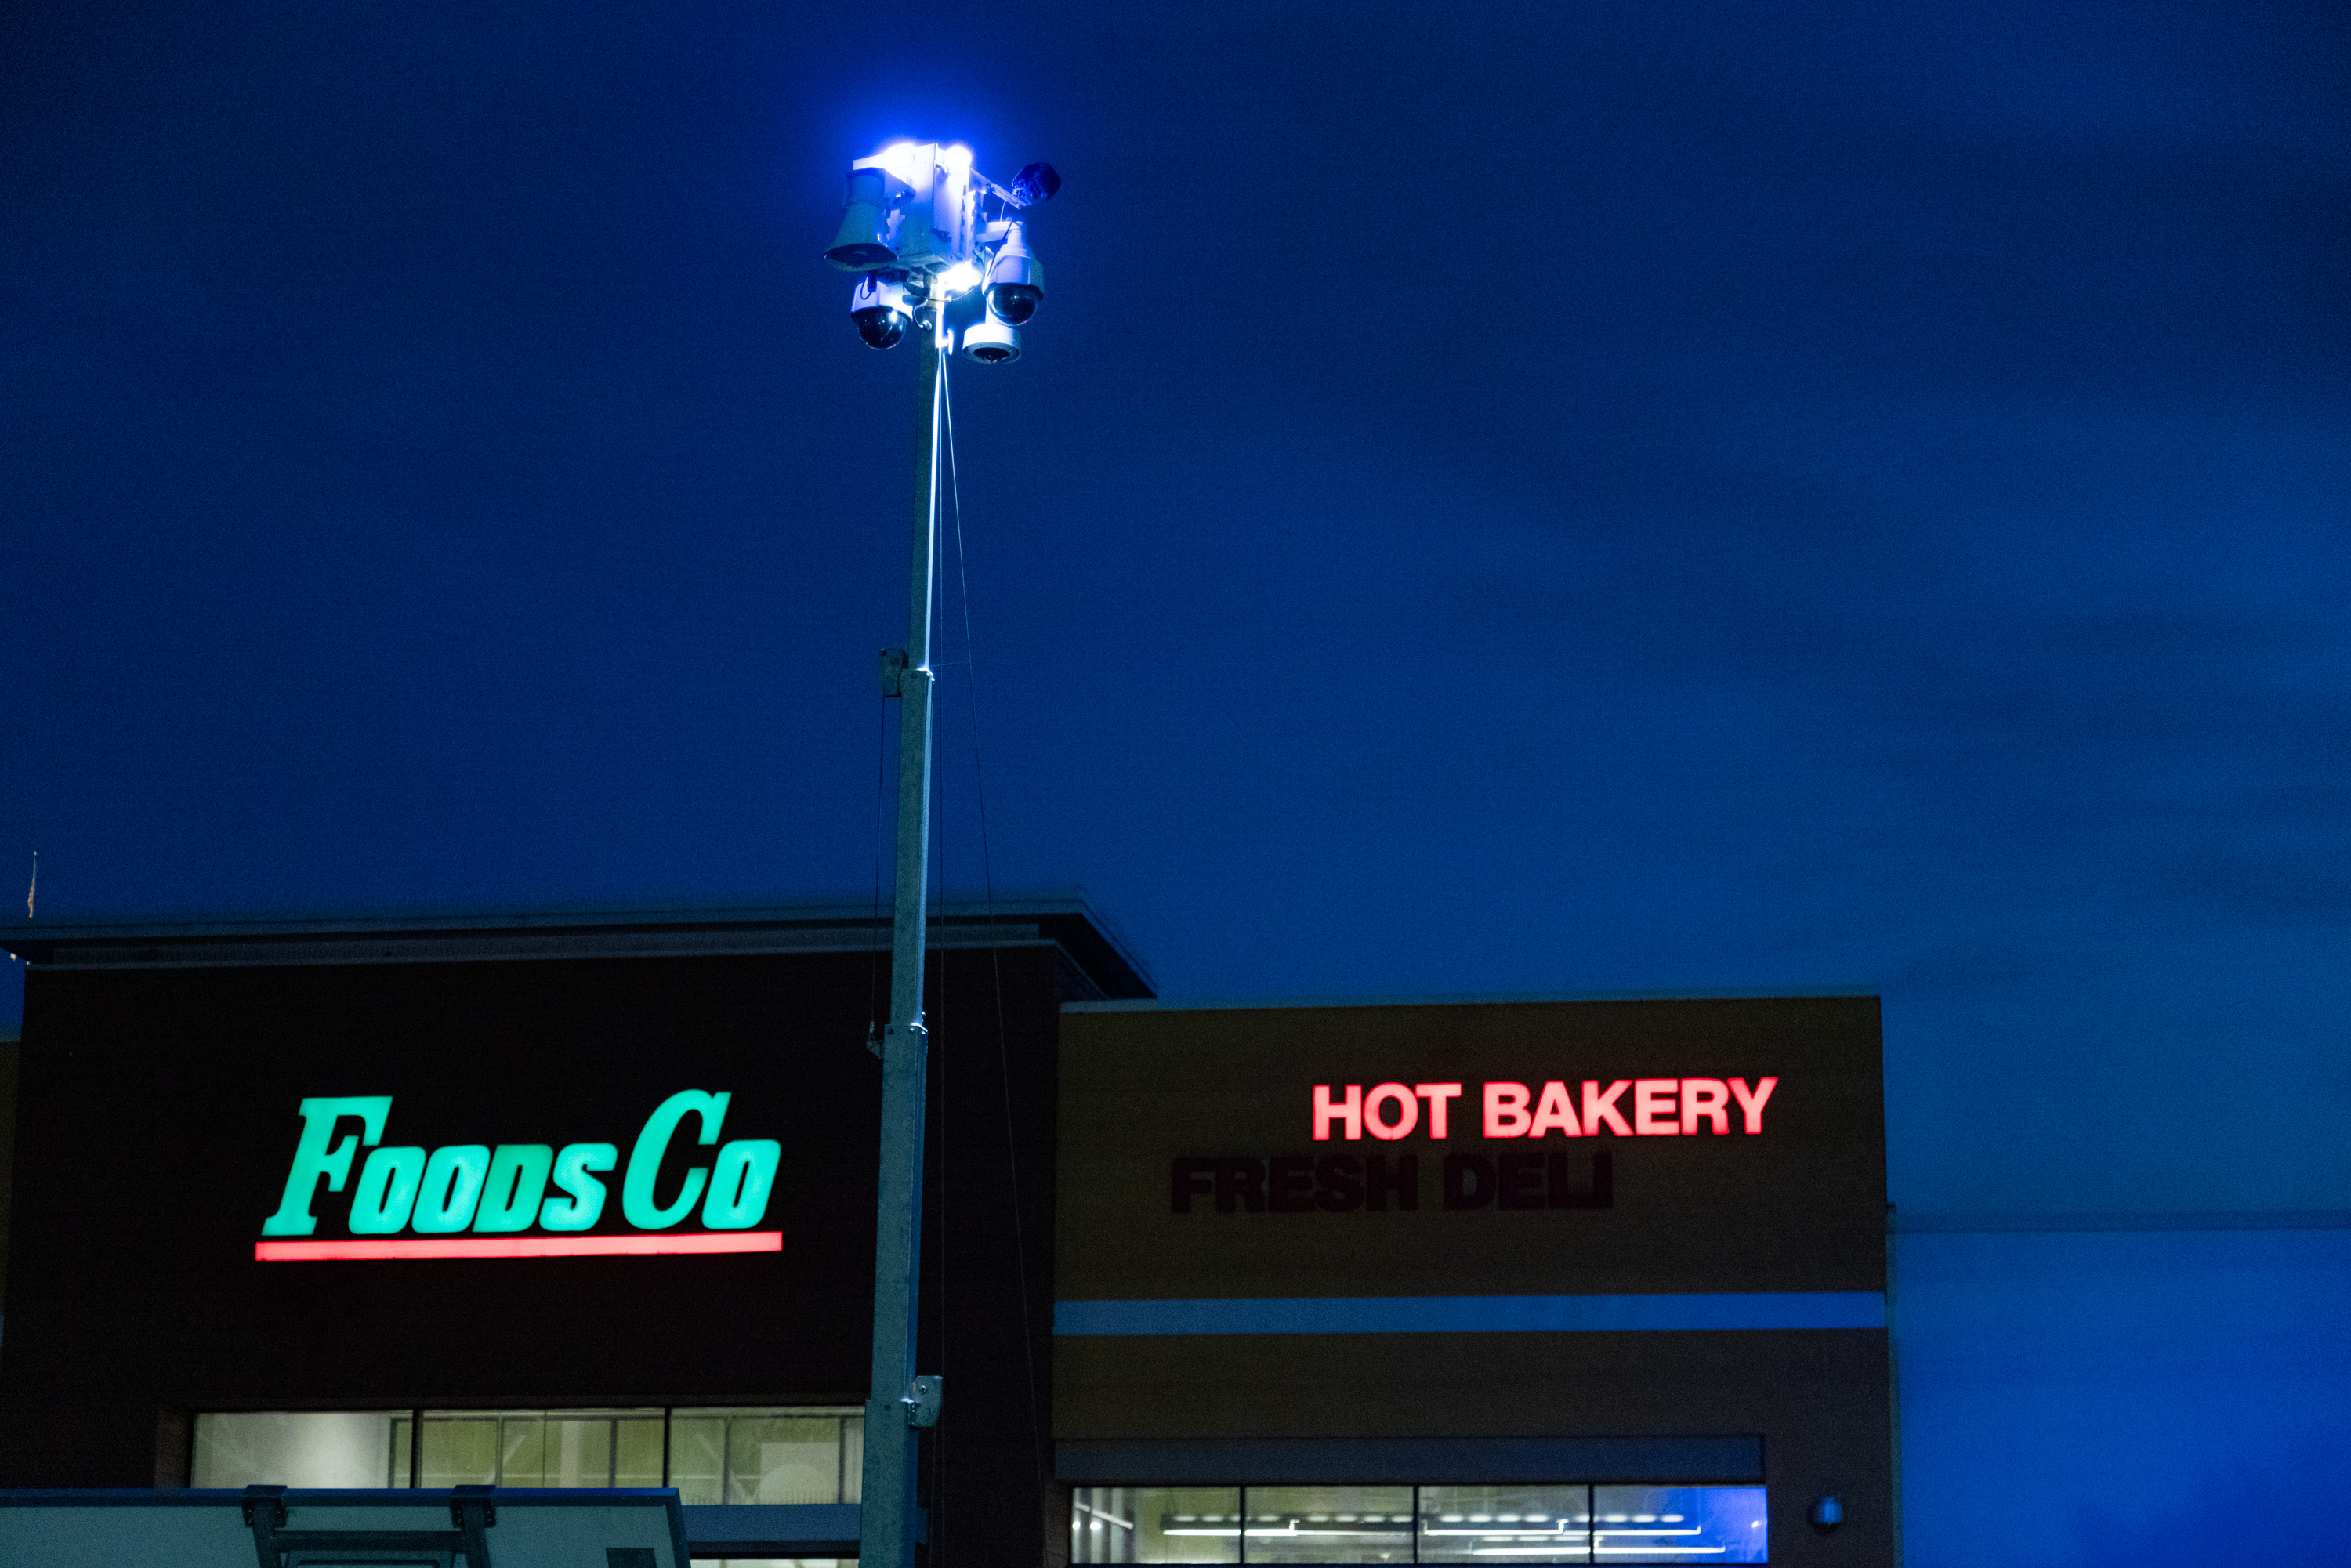 A security camera is set up in a parking lot of a Foods and Co at night.